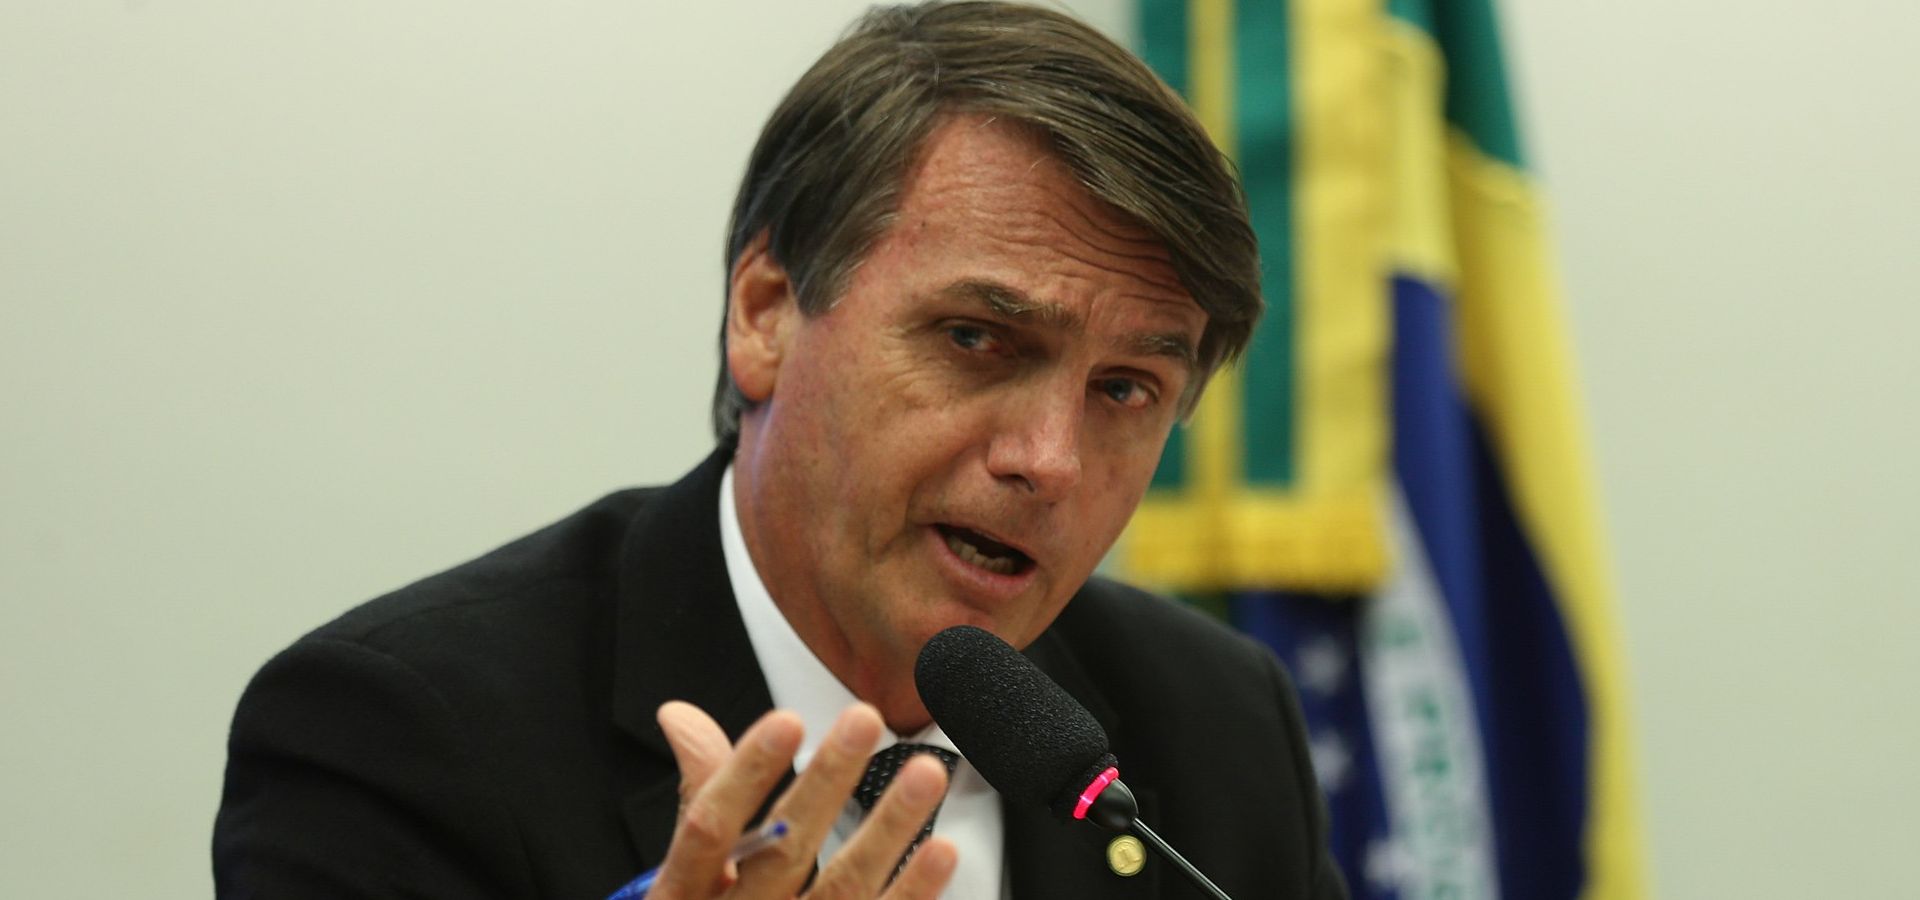 With the new election from Bolsonaro, Brazil´s climate path could fastly change as he is favoring fossil fuels.